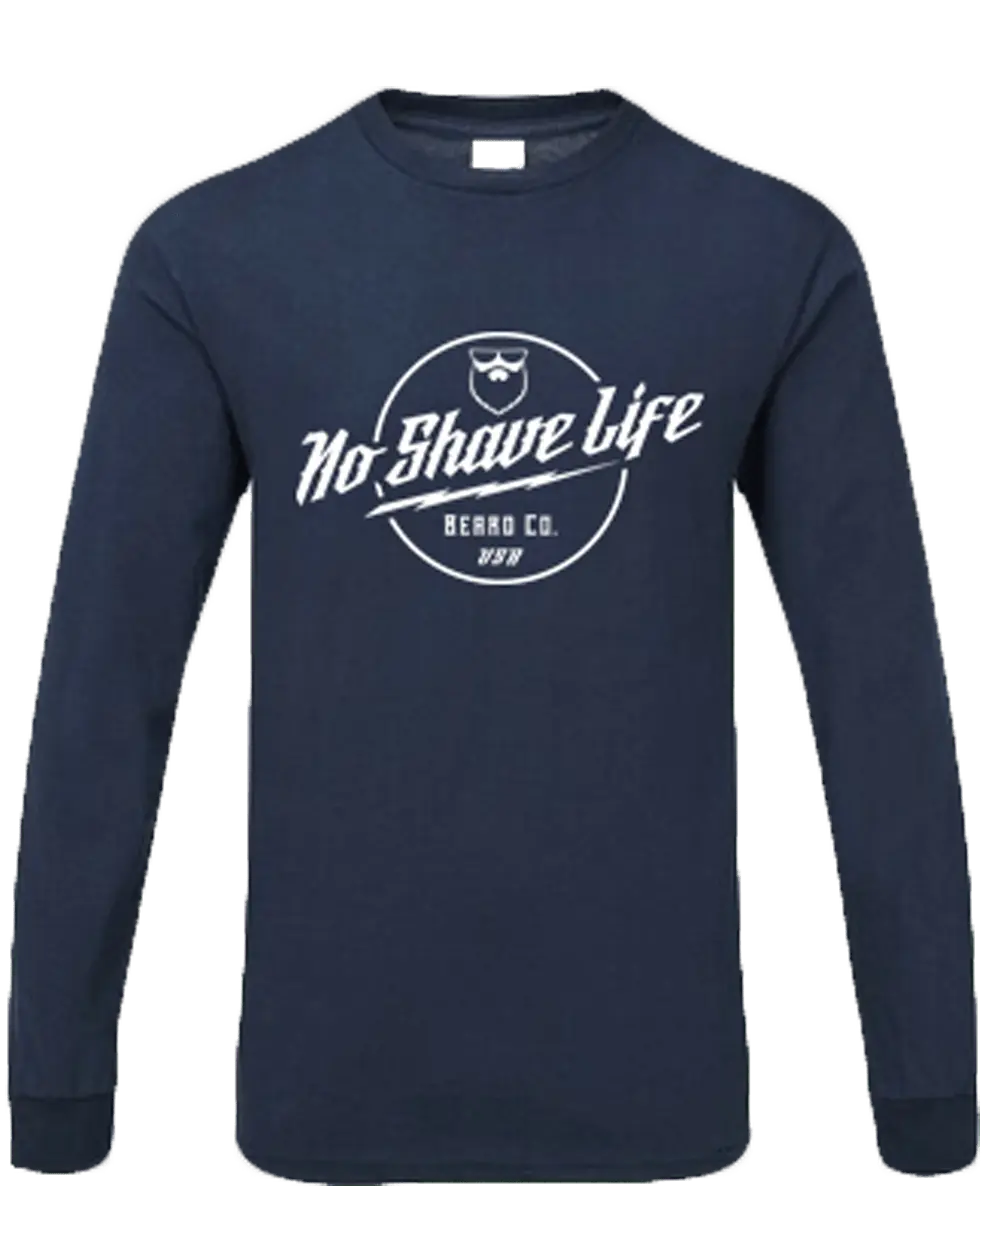 No Shave Life Crate Navy Blue Long Sleeve Shirt